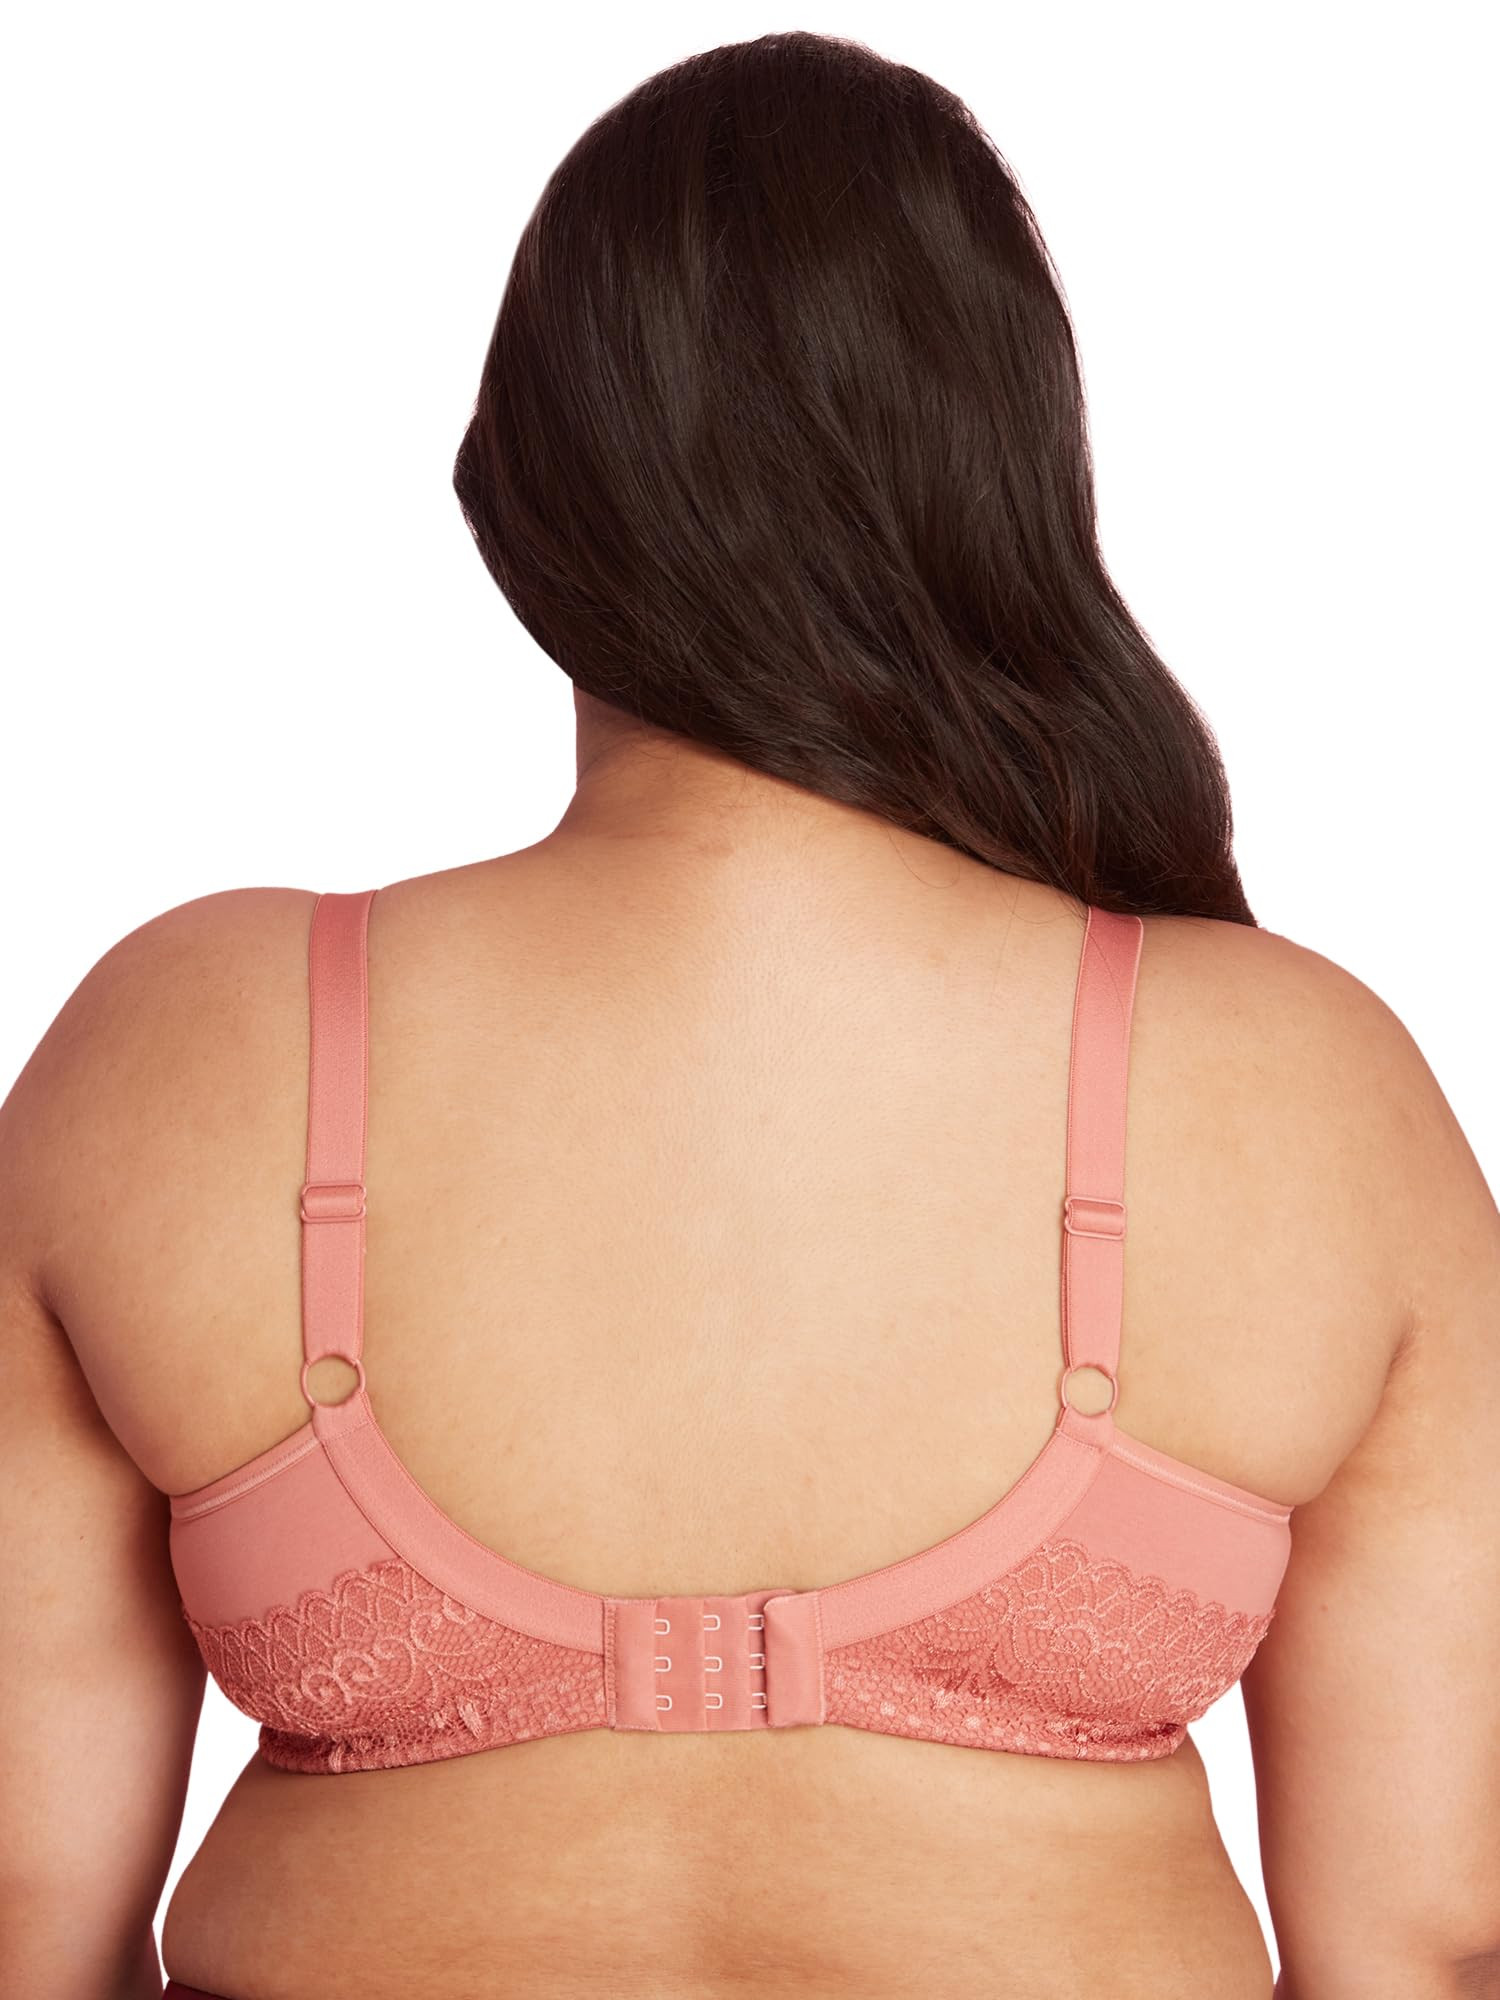 Buy Nykd by Nykaa Support Me Pretty Bra - Mauve NYB101 online